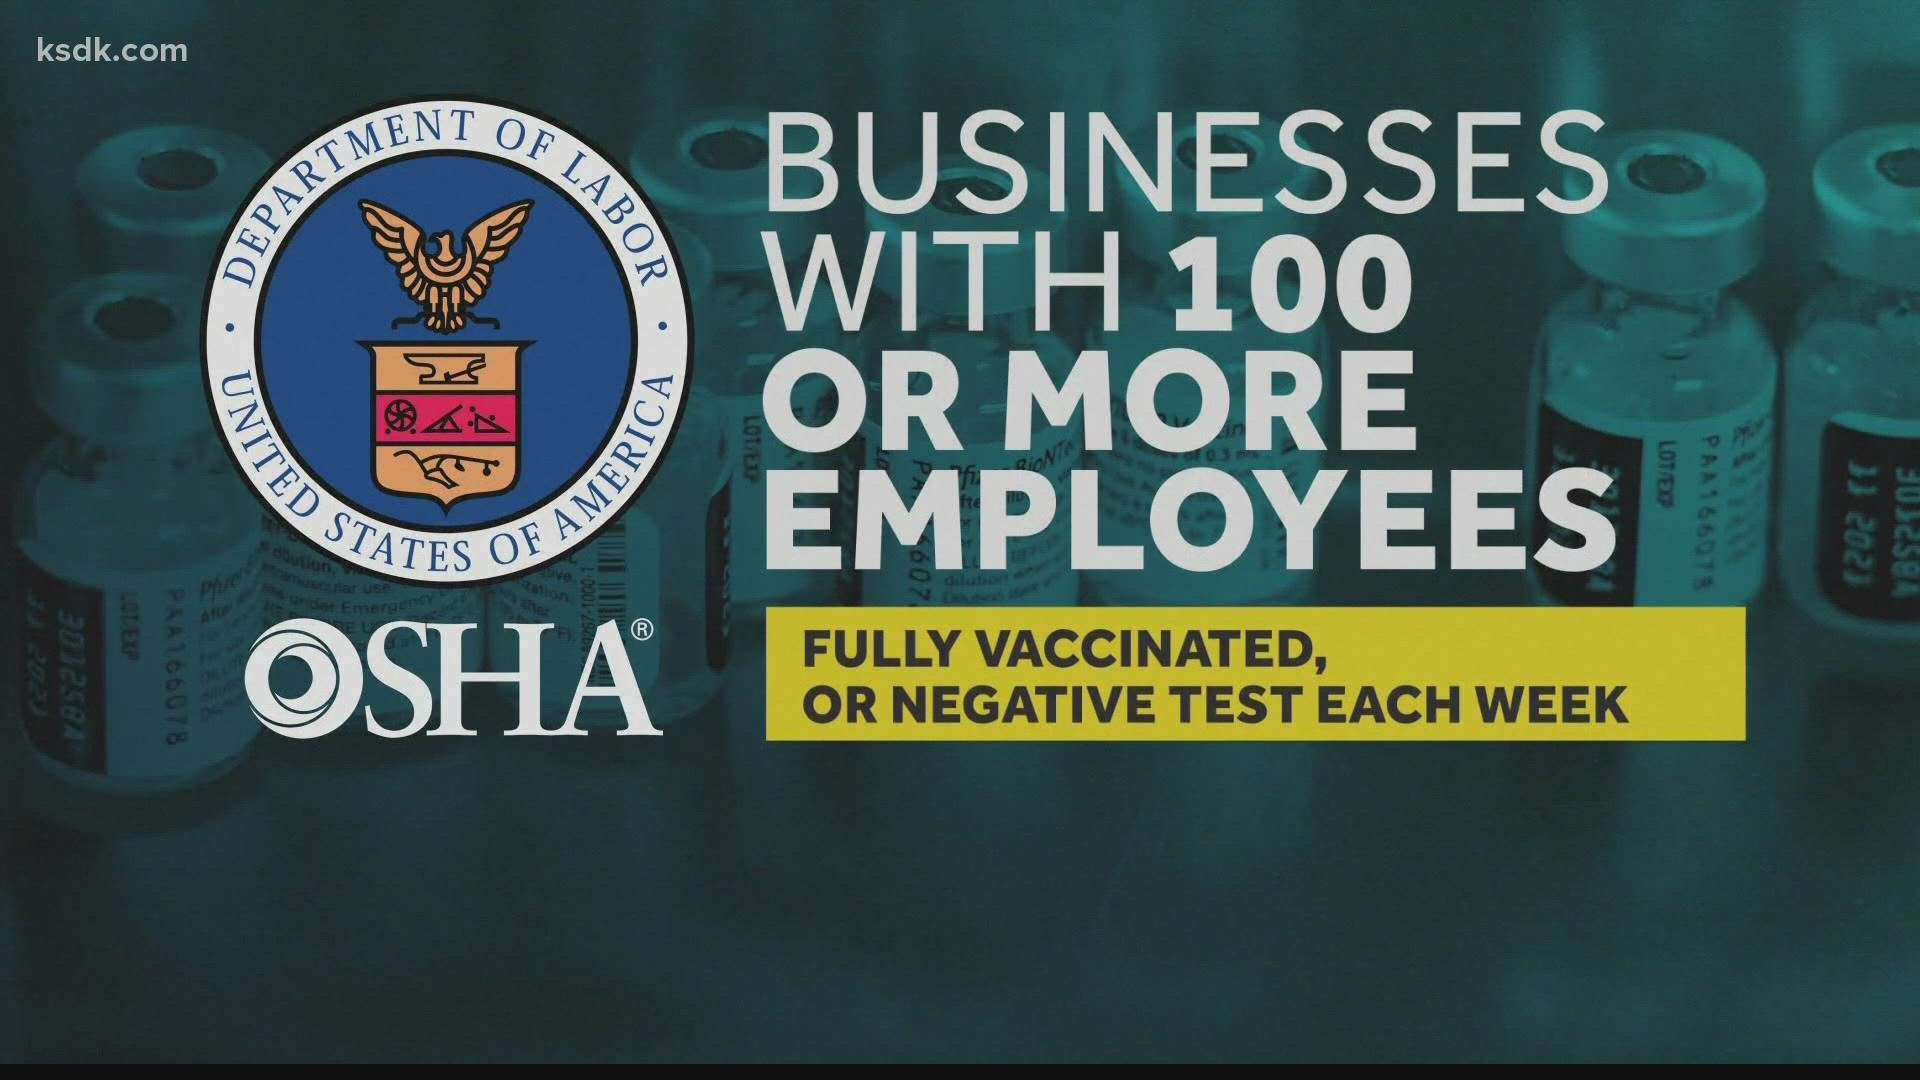 We're seeing pushback on the federal COVID vaccine requirement. Missouri is one of the state vowing to fight the mandate.